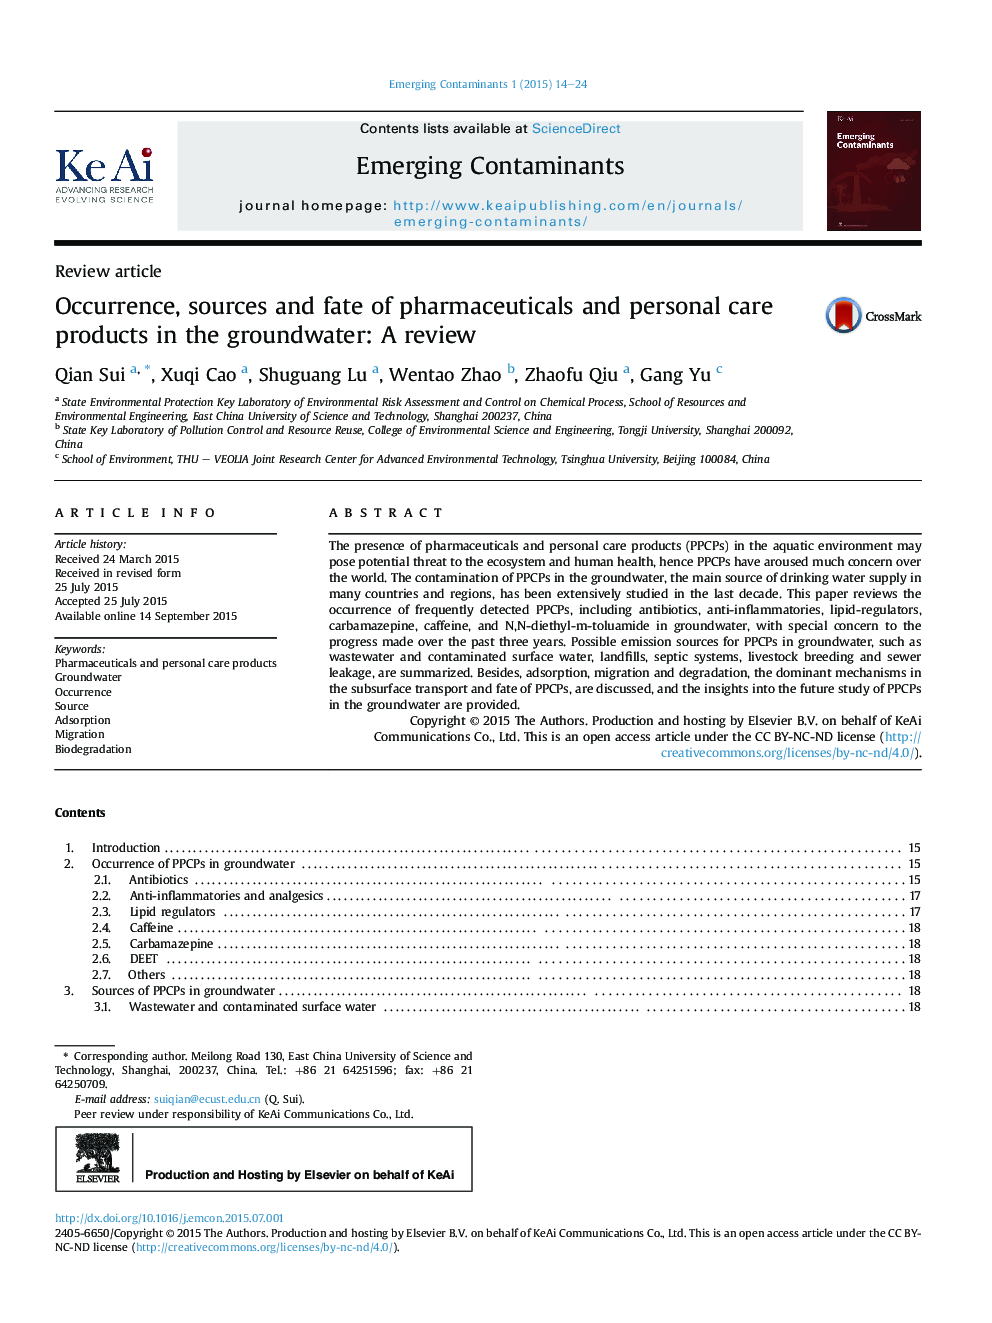 Occurrence, sources and fate of pharmaceuticals and personal care products in the groundwater: A review 